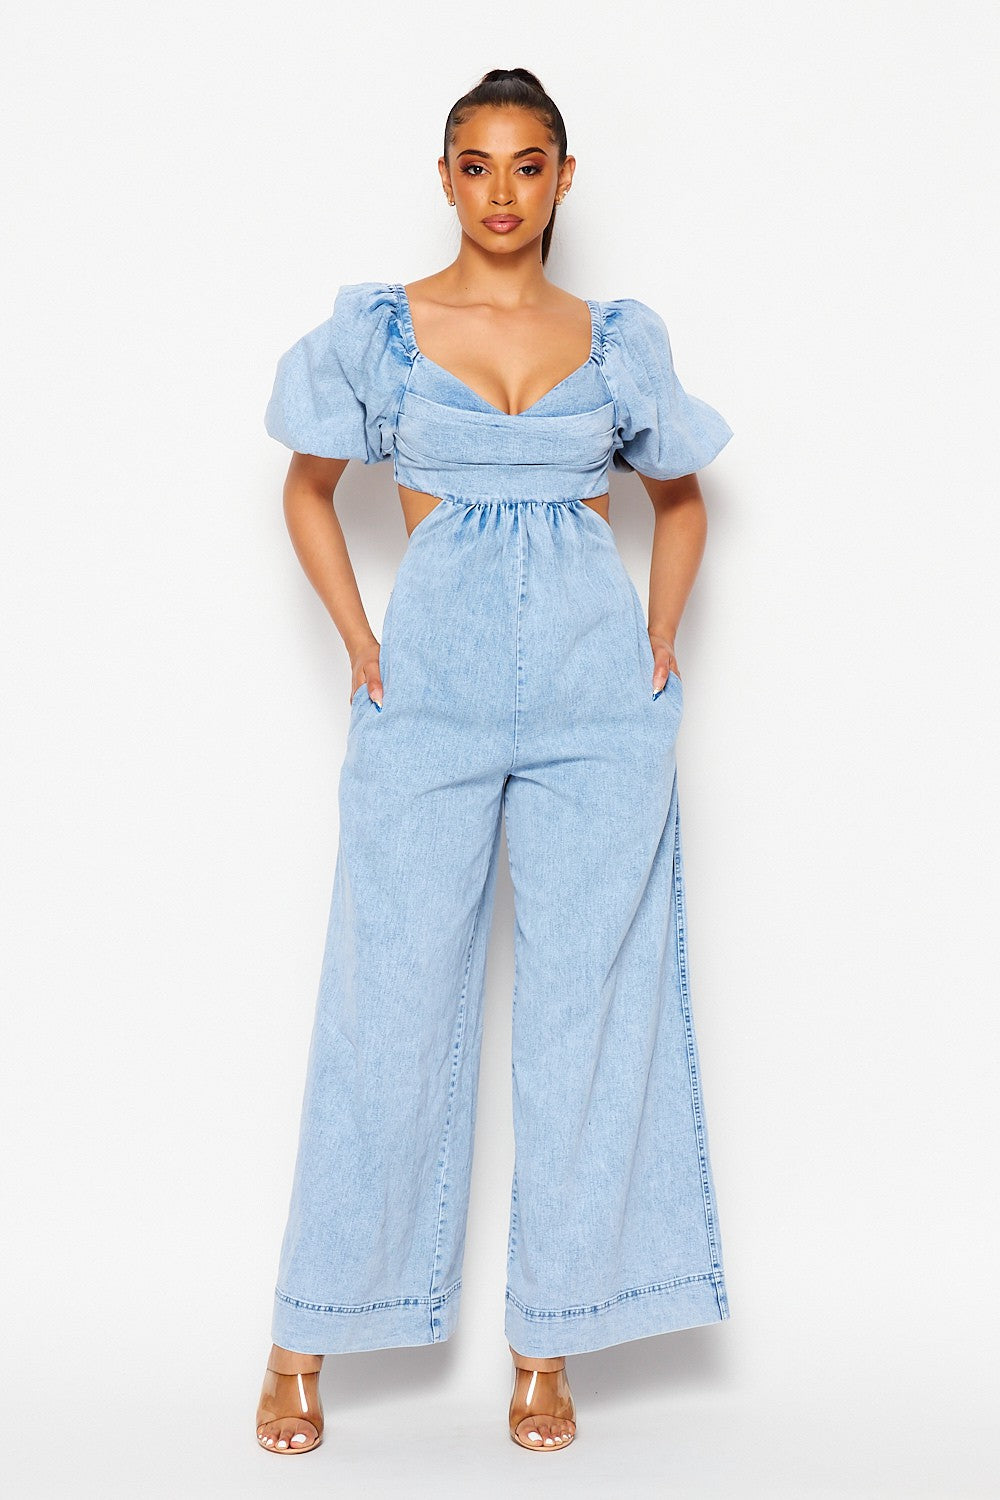 You and Me Exposed Back Denim Jumpsuit